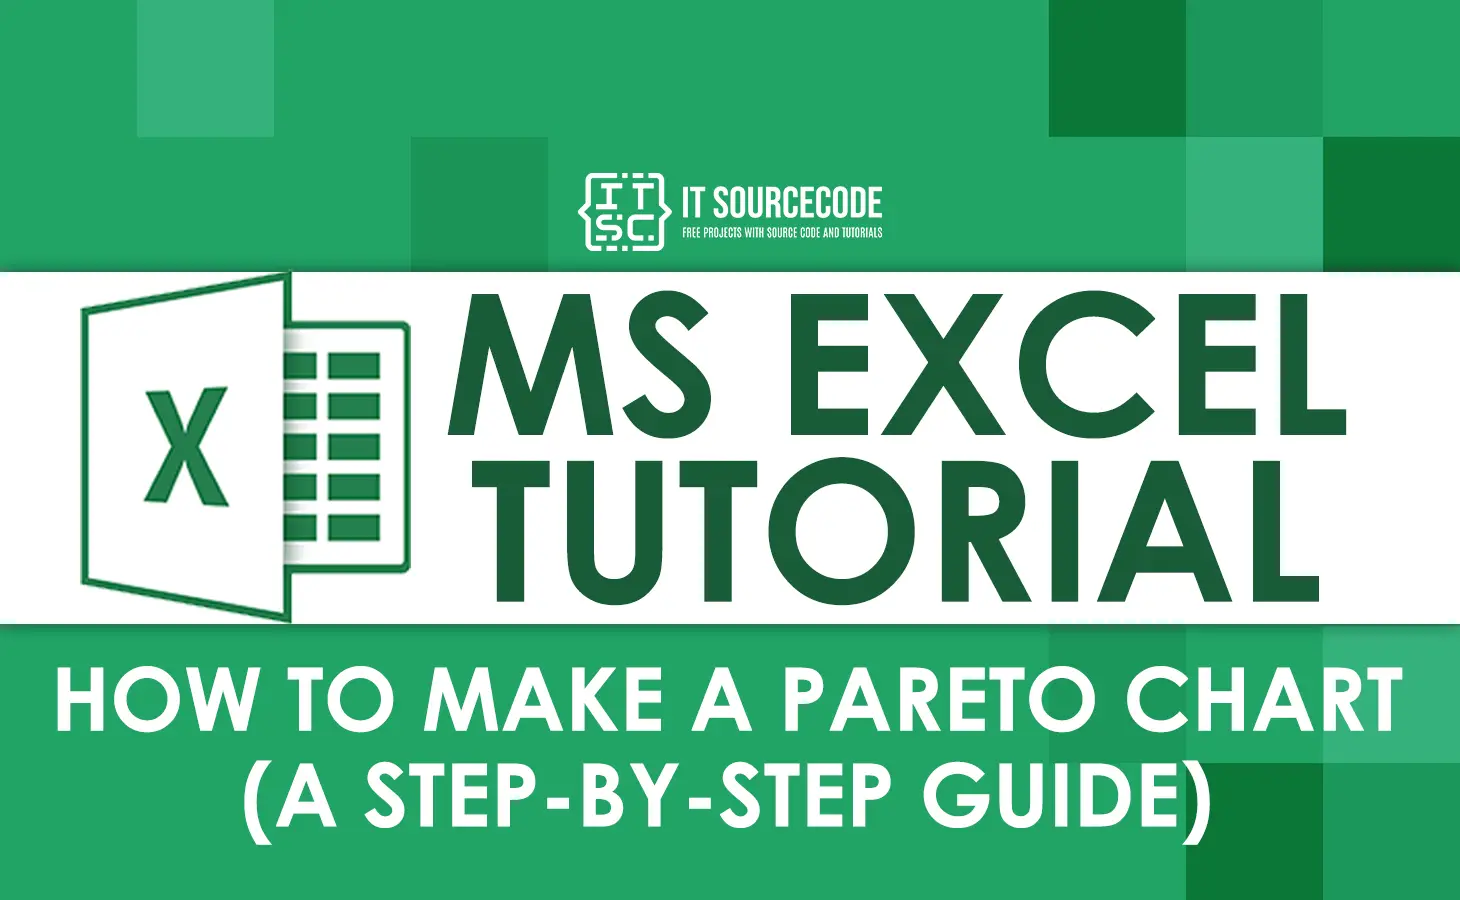 How To Make A Pareto Chart In Excel? Step-by-step Guide